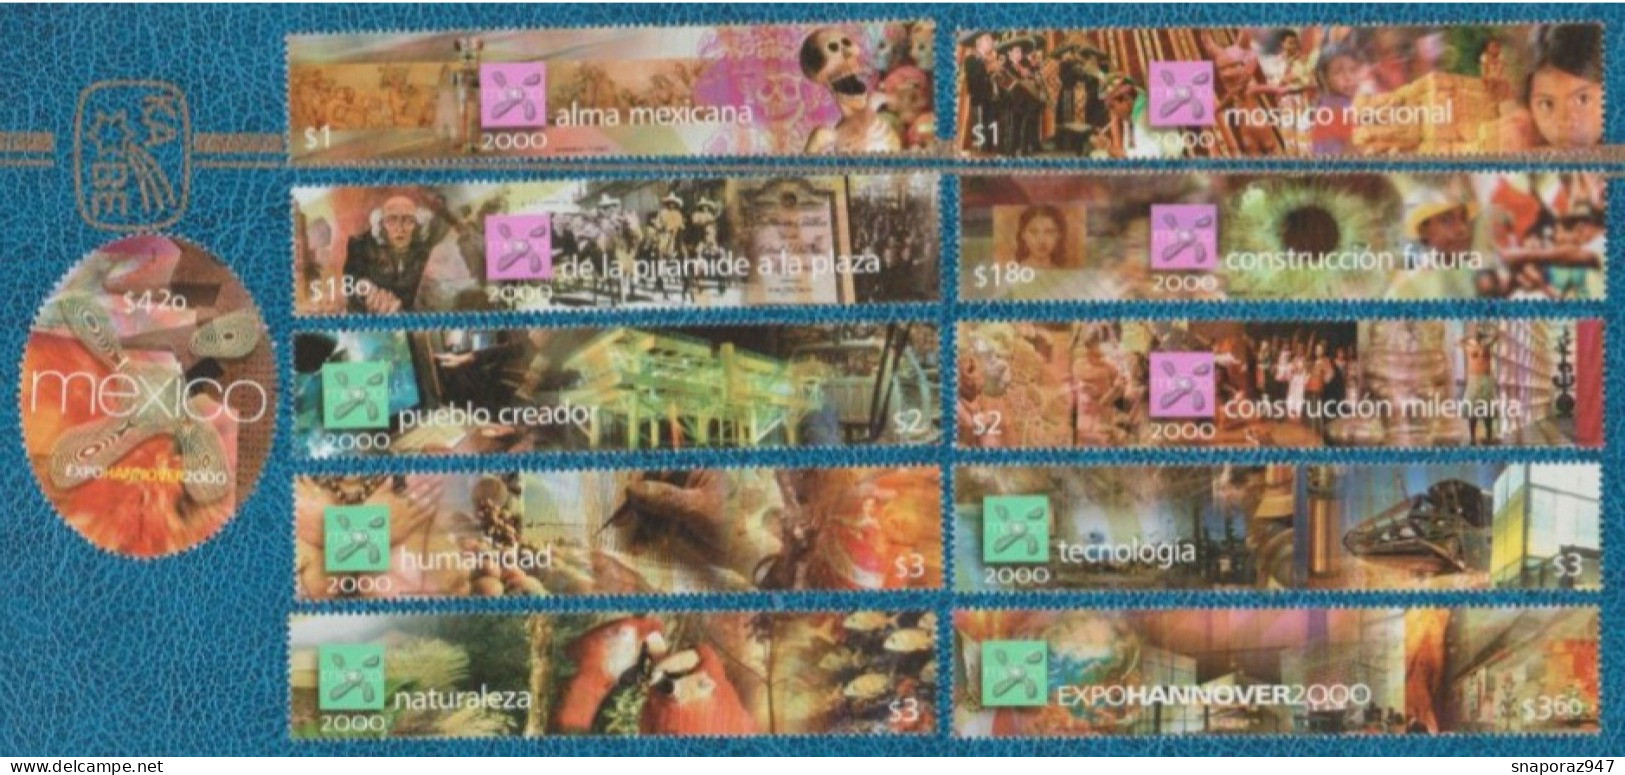 2000 Messico "Expo 2000" Universal Exhibition In Hanover (Block Printed) Set MNH** RX77 - 2000 – Hannover (Duitsland)